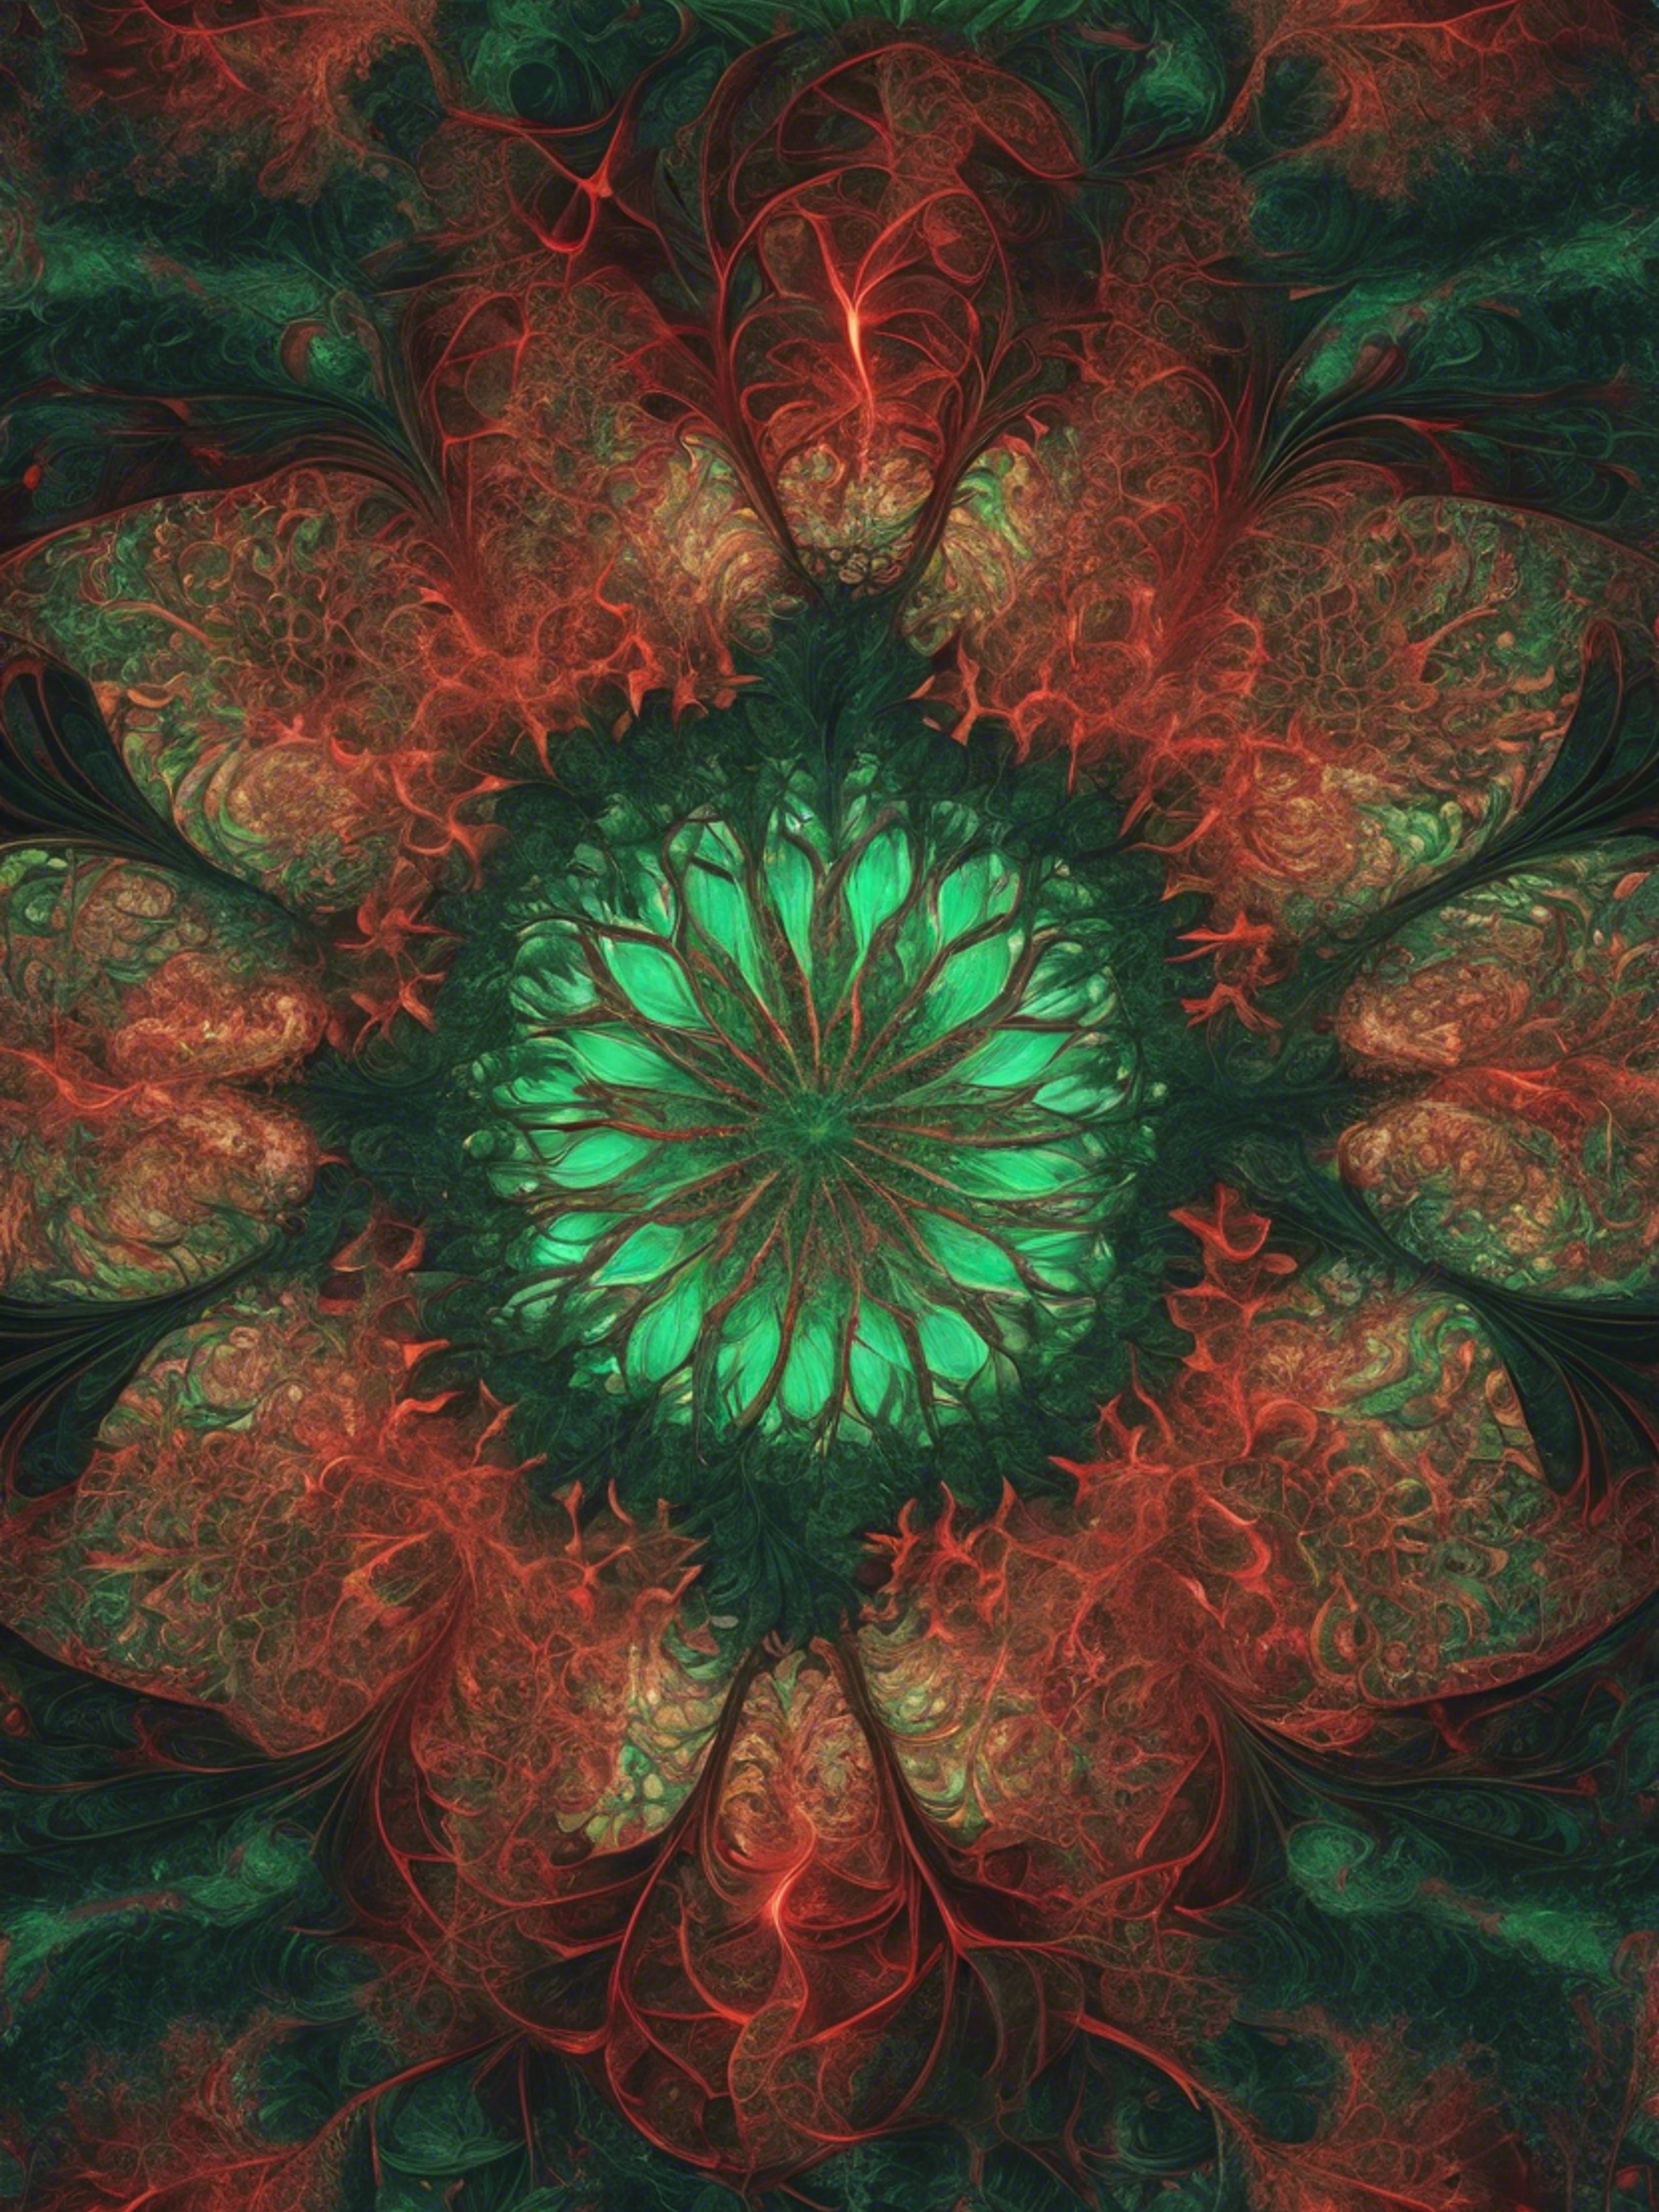 Intricate fractal patterns composed of alternating red and green hues 牆紙[0376ed7744fd4b80a9ab]